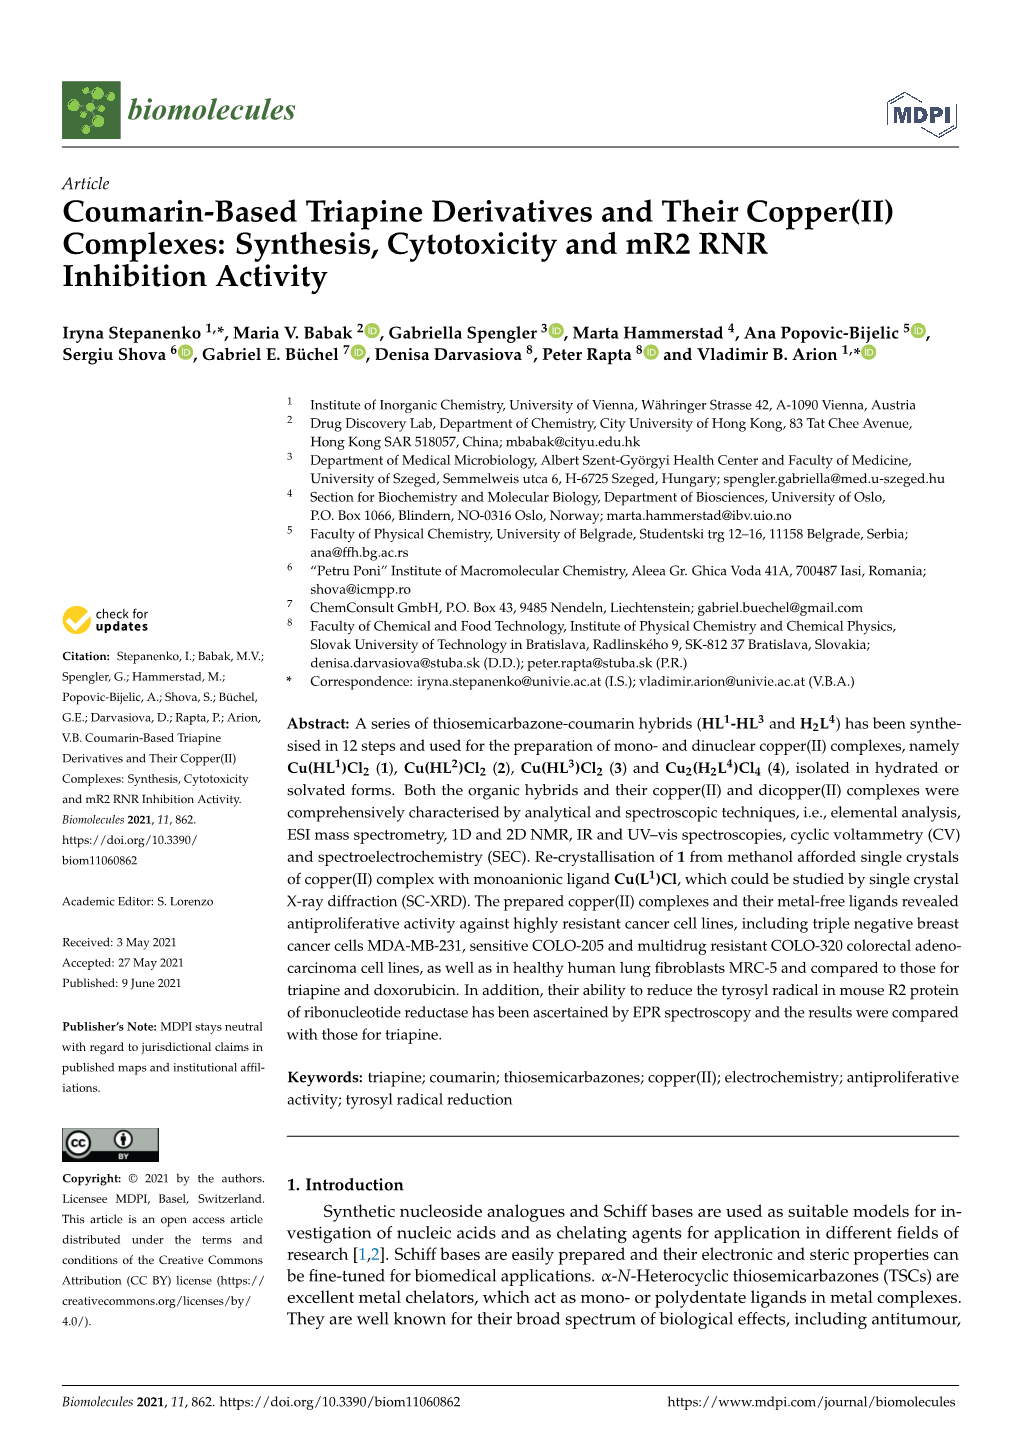 Coumarin-Based Triapine Derivatives and Their Copper(II) Complexes: Synthesis, Cytotoxicity and Mr2 RNR Inhibition Activity